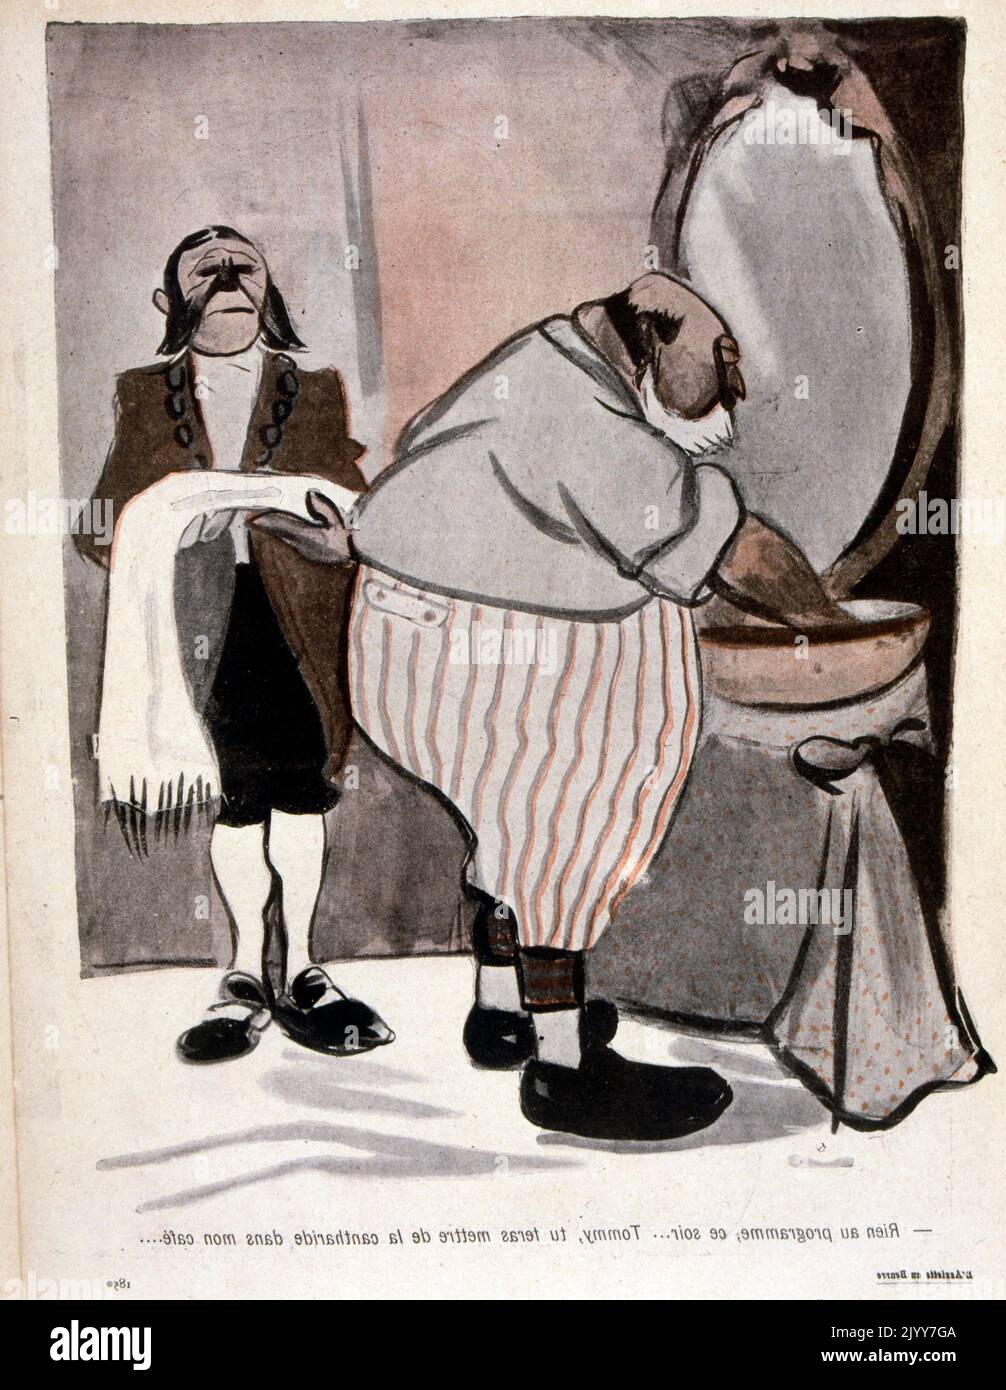 In L'Assiette au Beurre satirical magazine; Coloured satirical drawn image of the front cover. A fat English king washing in a bain waited upon by a servant resembling a monkey Stock Photo